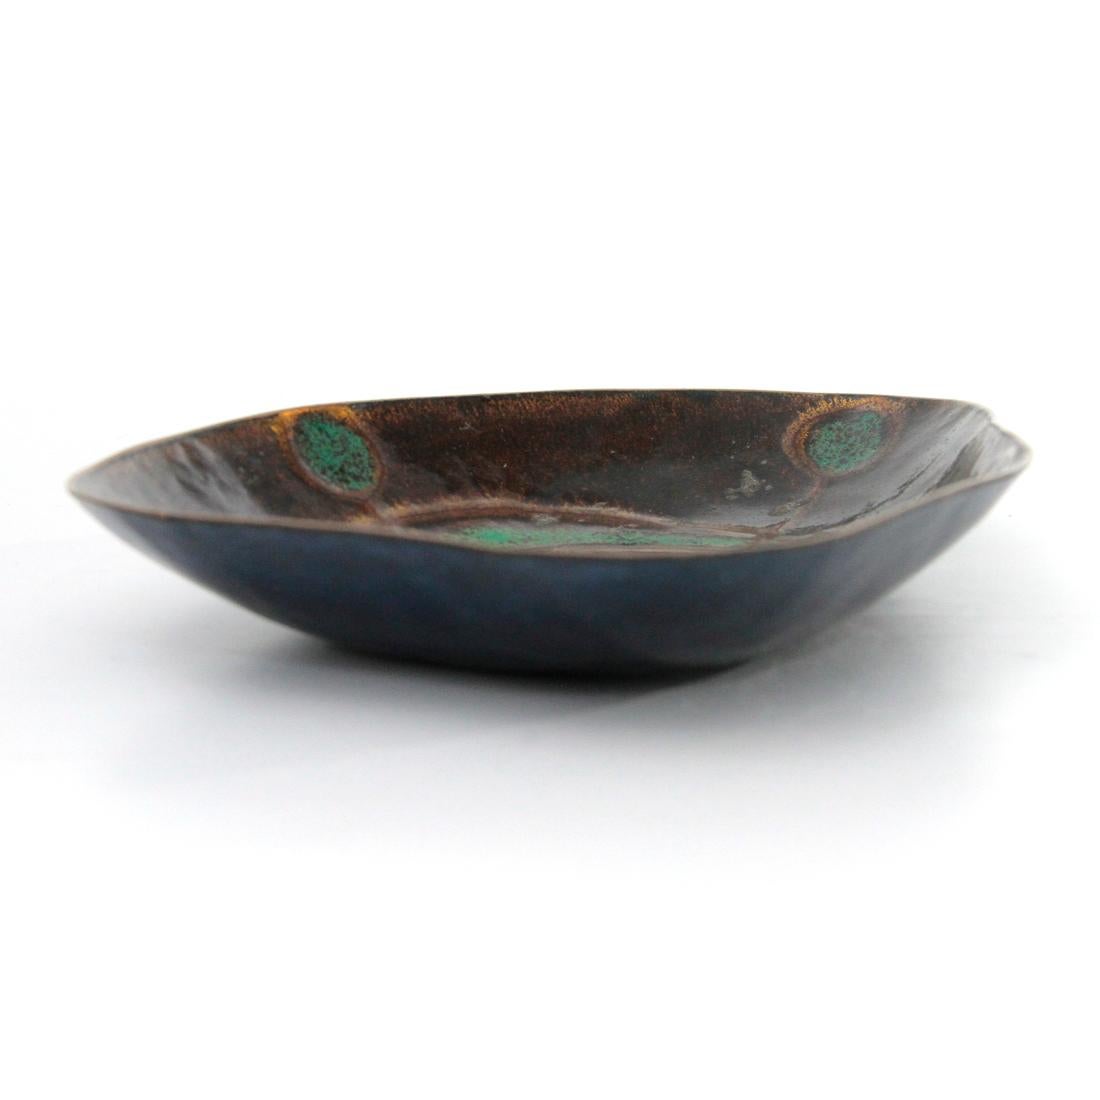 Enameled copper bowl of Italian manufacture produced in the 1960s.
Inner surface glazed in brown and green.
External surface glazed in blue.
Good general conditions, some signs due to normal use over time.

Dimensions: Length 14 cm, depth 11